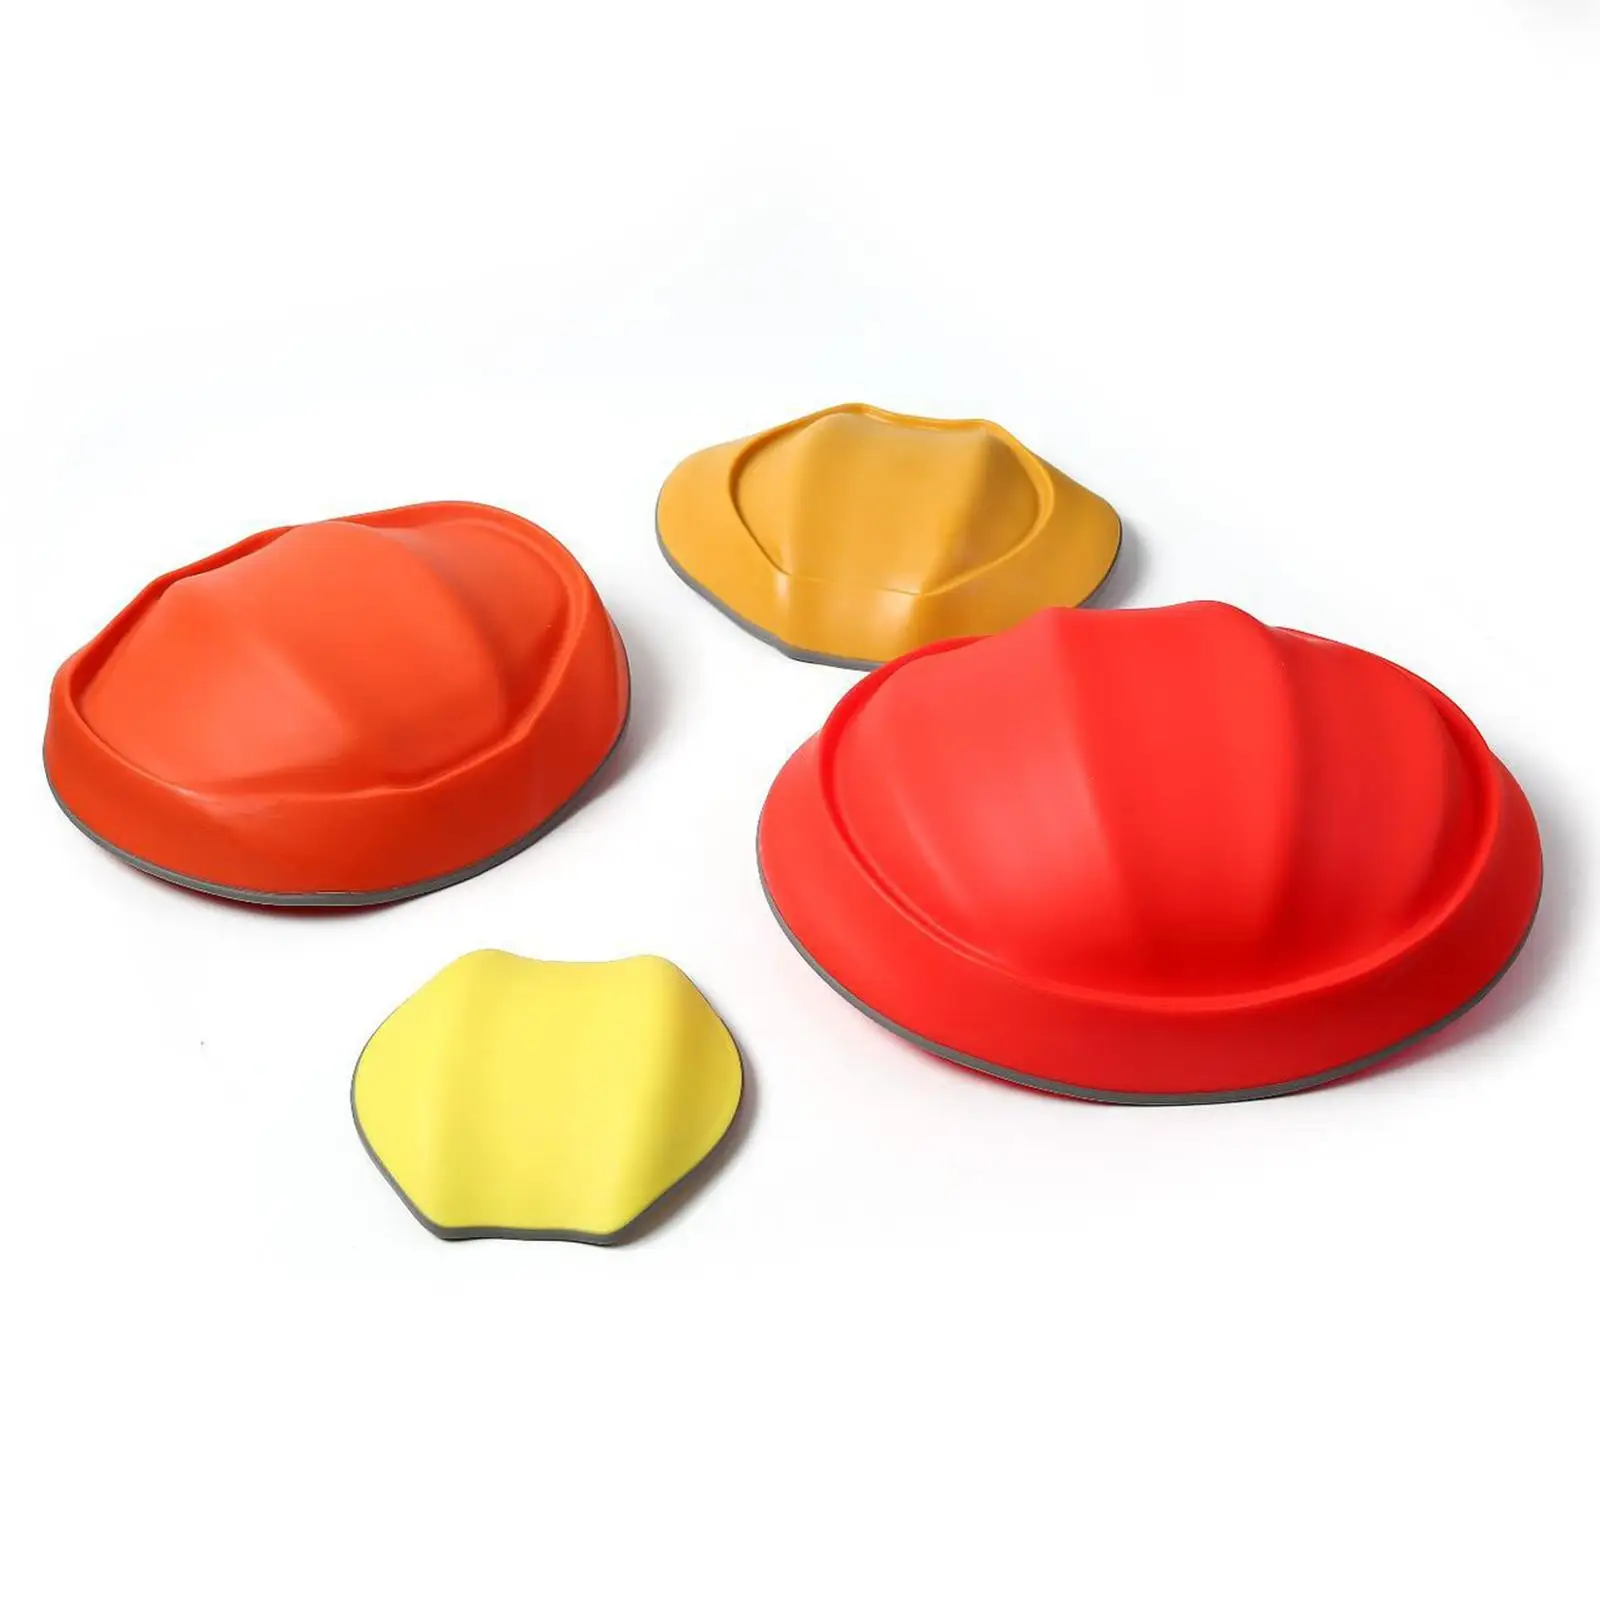 4 Pieces Balance Stepping Stones Exercise Coordination and Stability Outdoor Balance River Stones for Ages over 3 Family